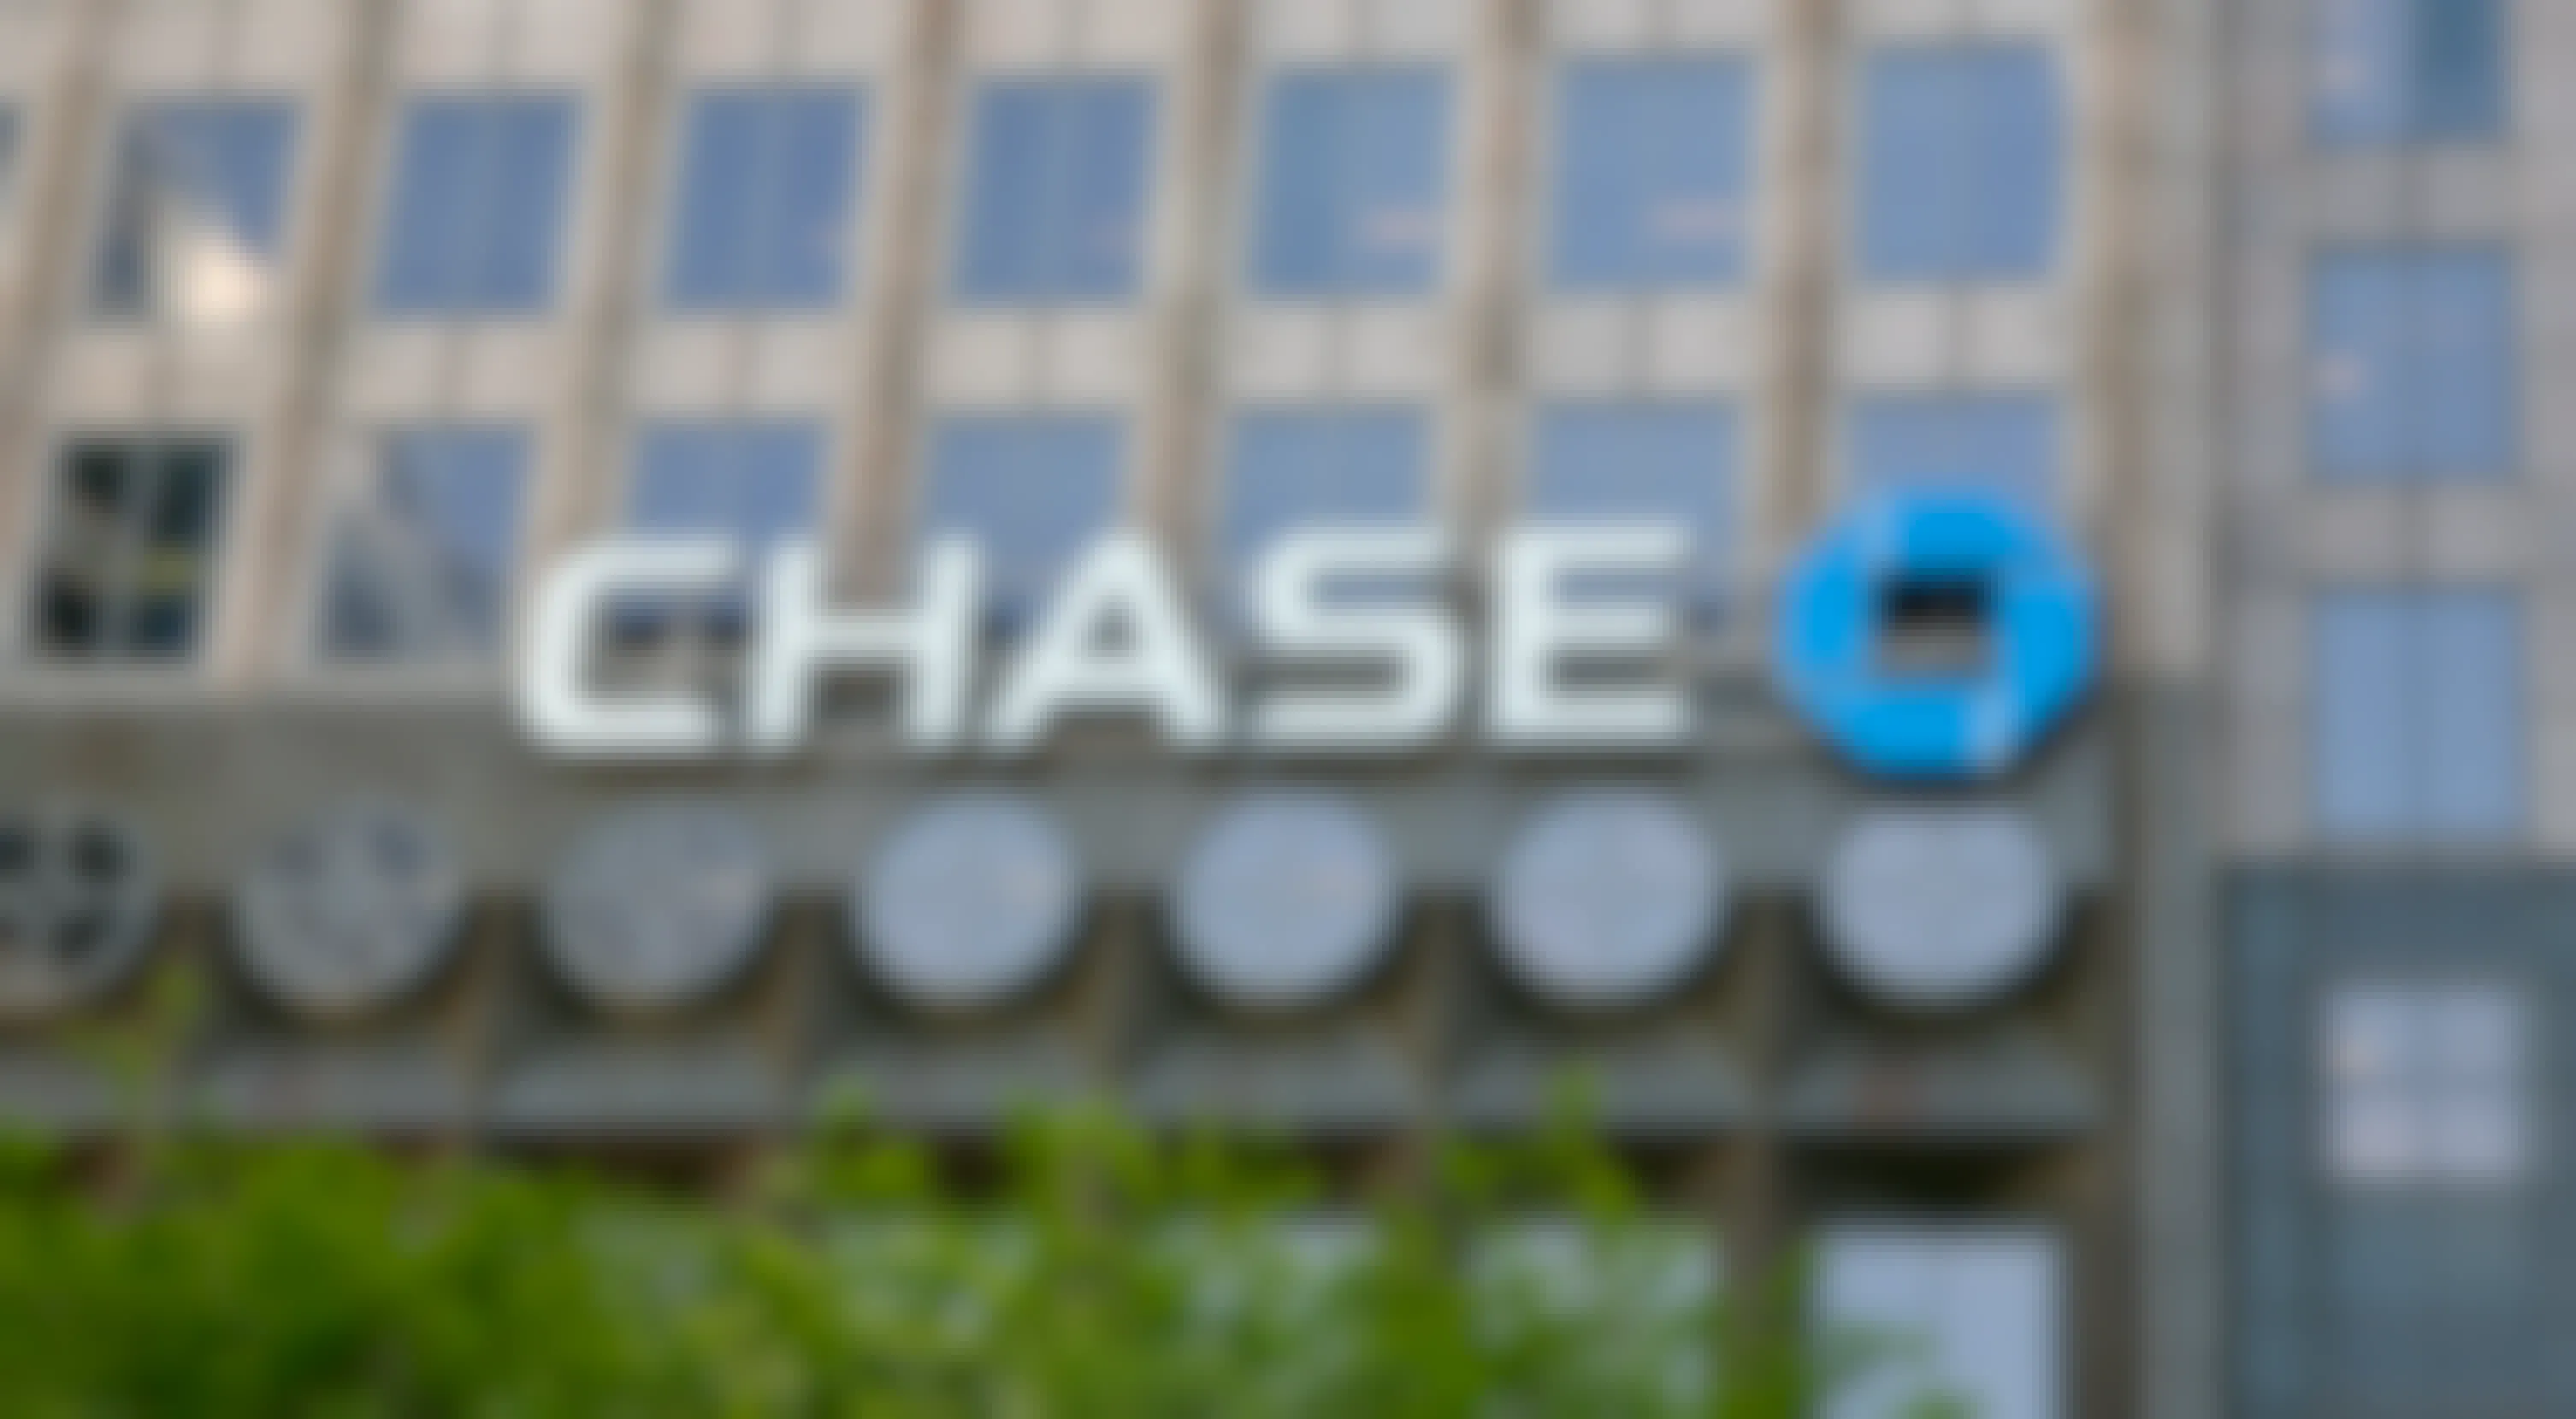 Picture of the Chase bank logo on a building